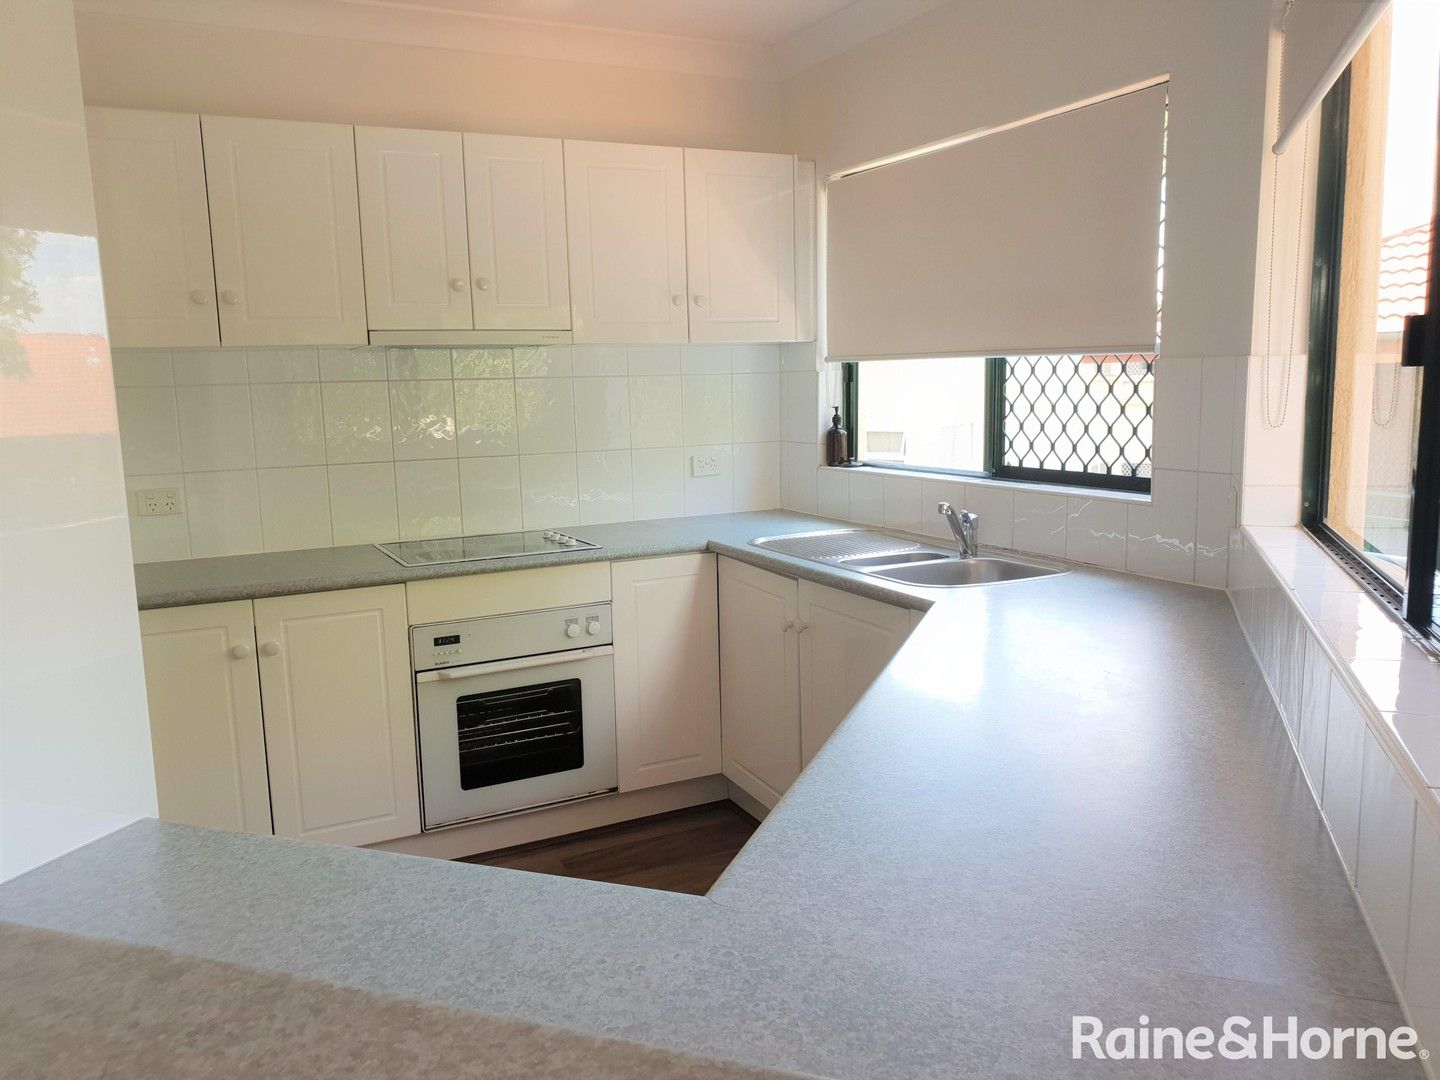 2 bedrooms Apartment / Unit / Flat in 15/28 Cadell Street TOOWONG QLD, 4066